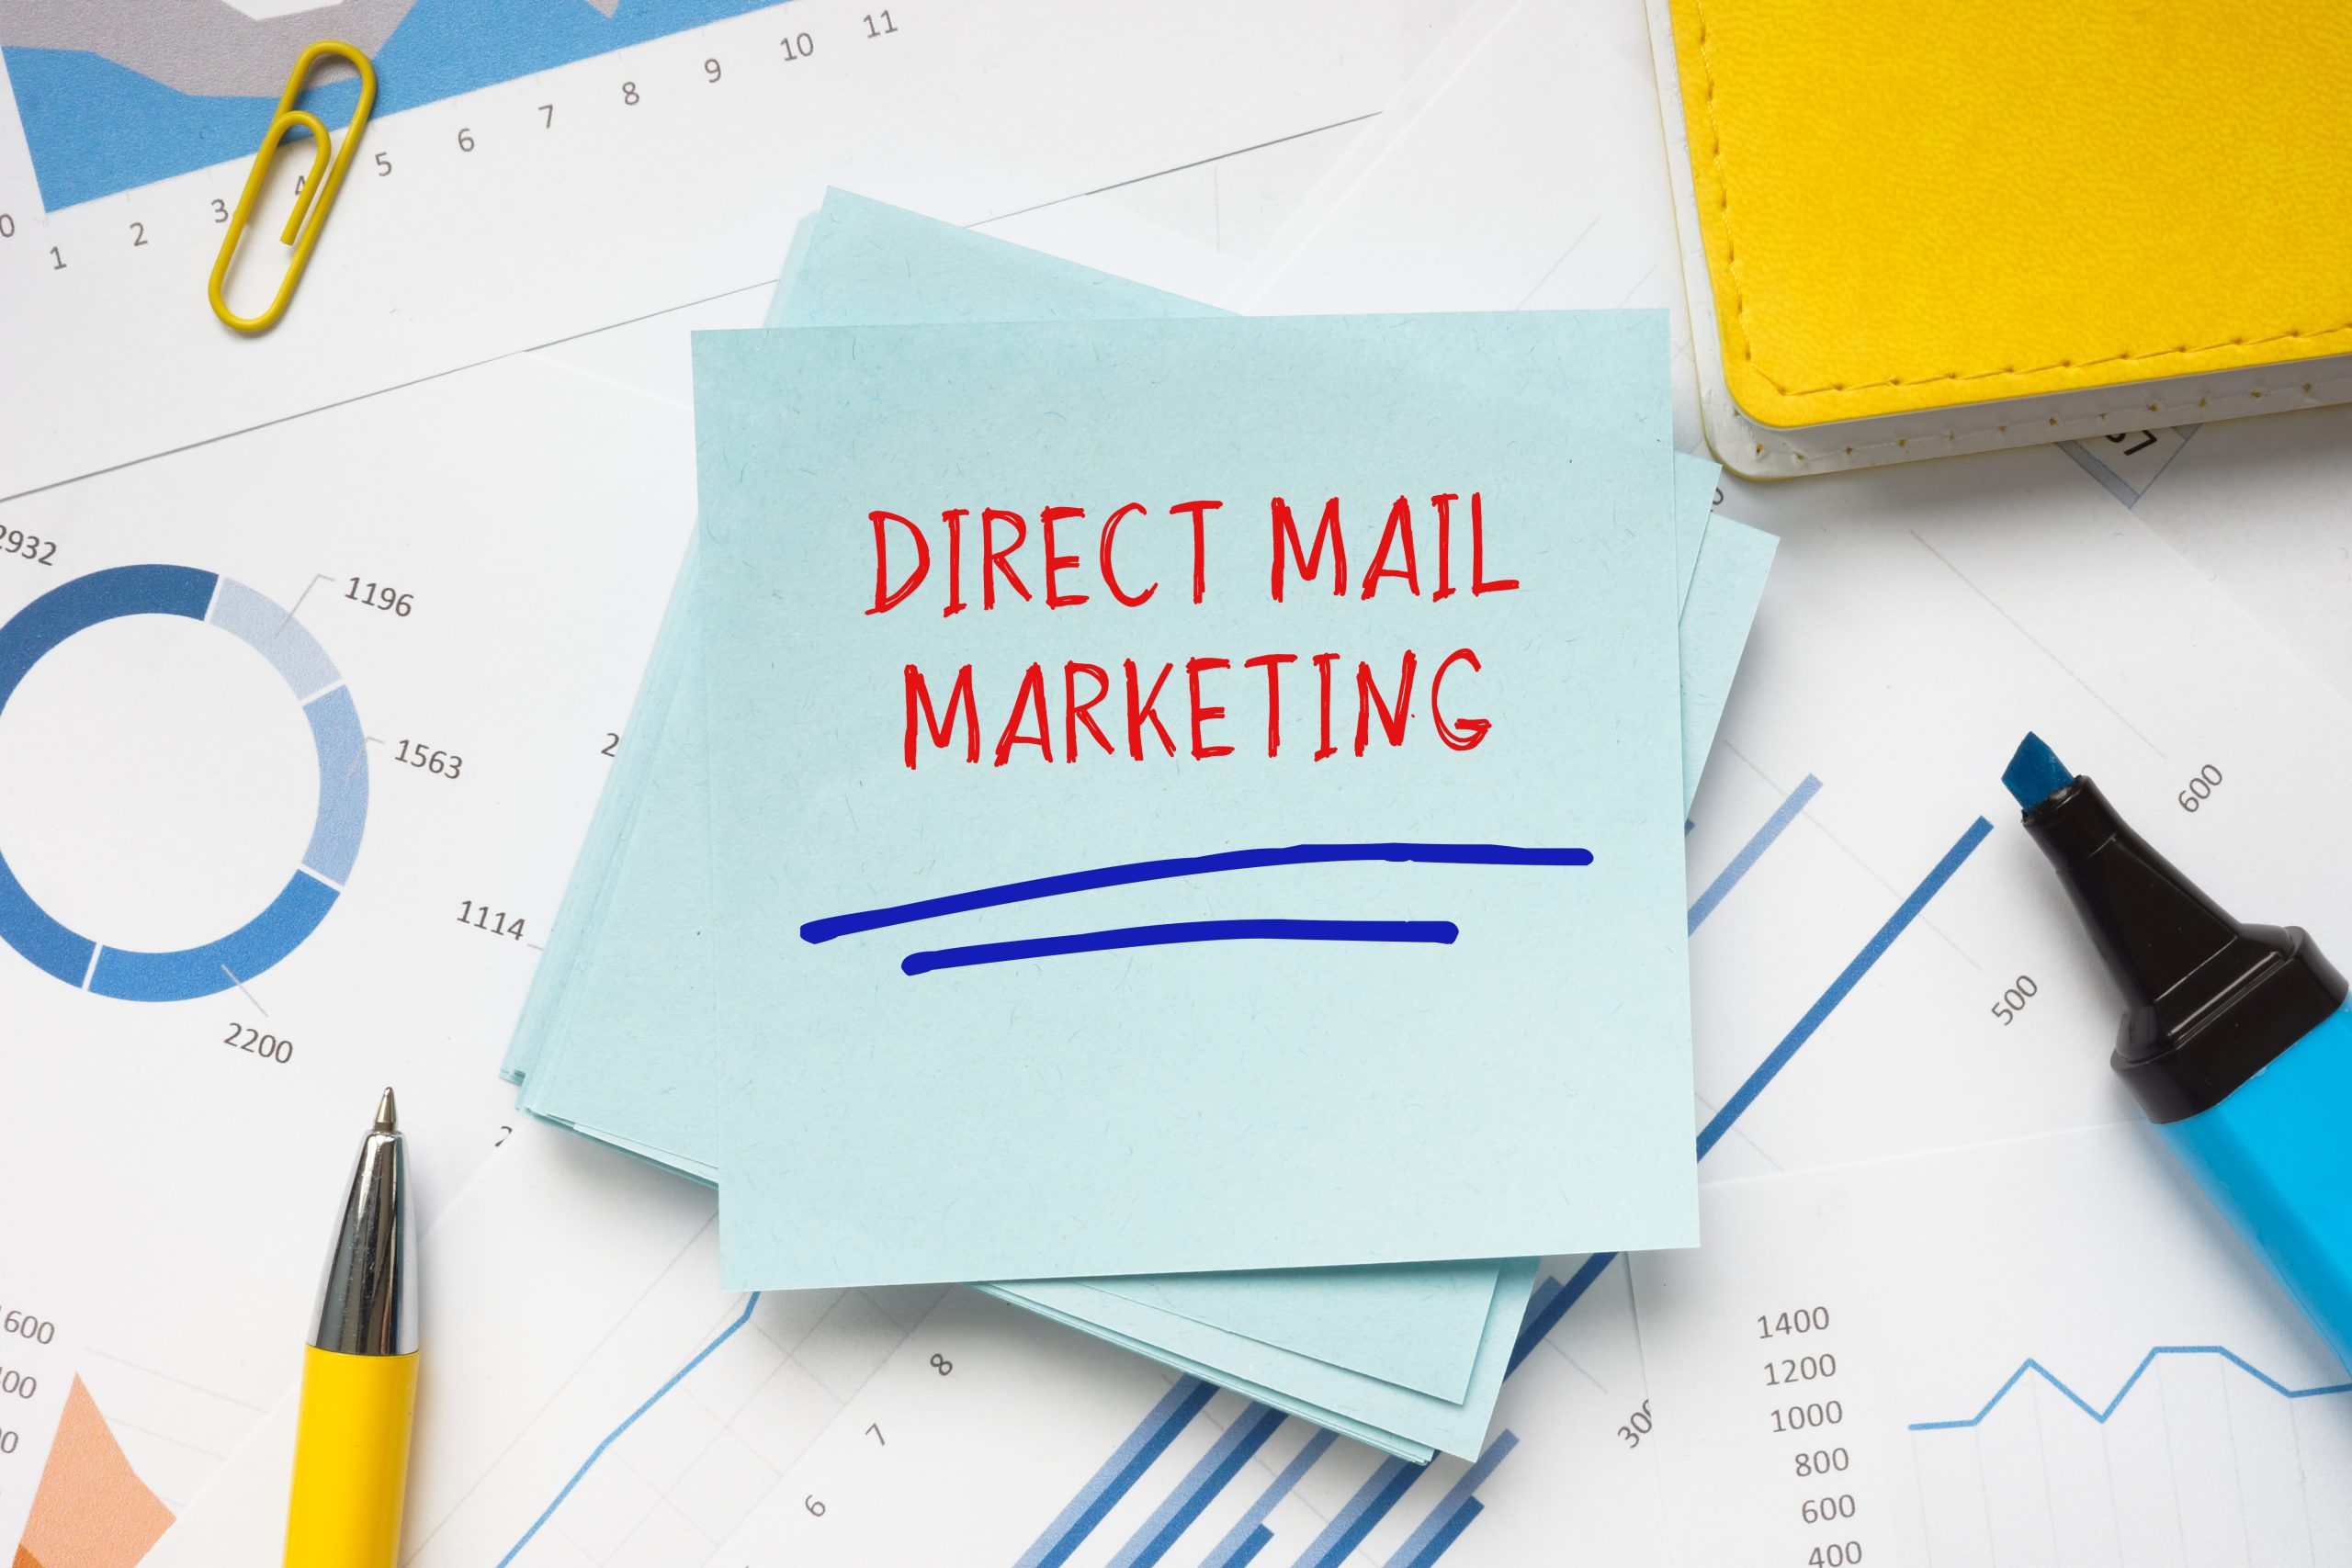 5 Reasons Your Business Needs Direct Mail Marketing